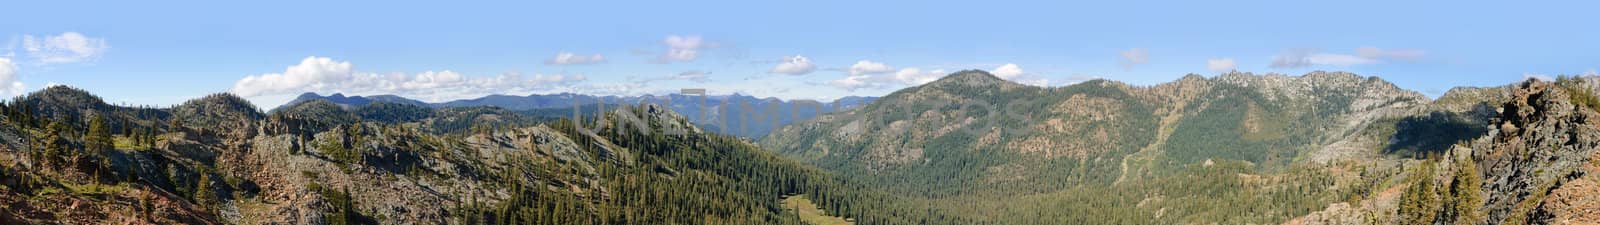 panorama of the Trinity Alps in Northern California